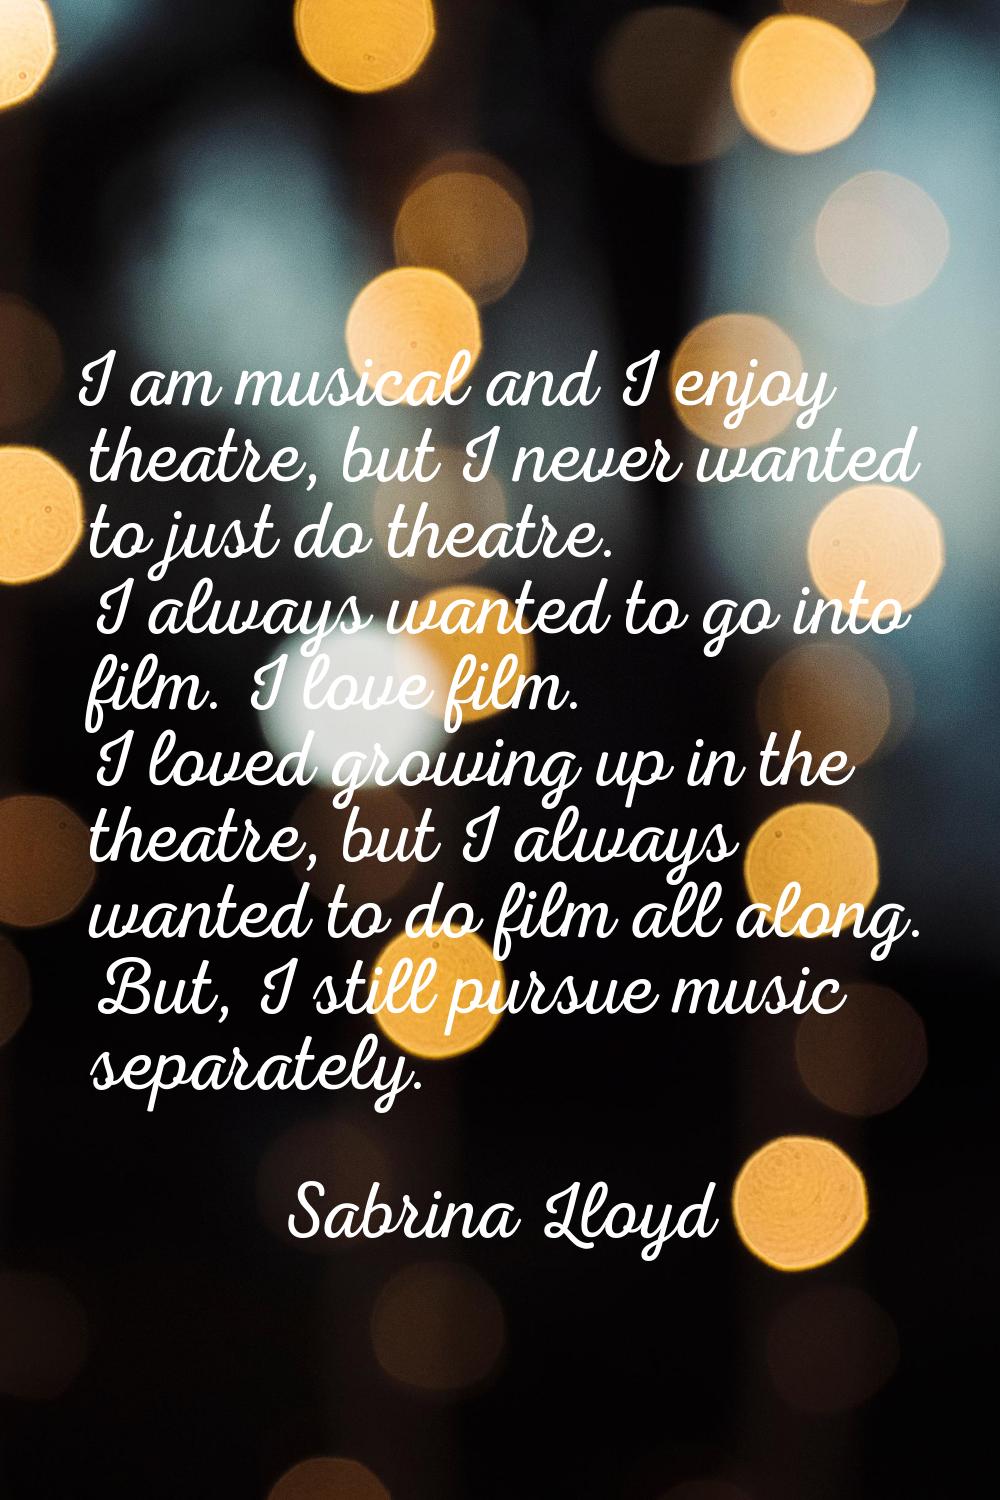 I am musical and I enjoy theatre, but I never wanted to just do theatre. I always wanted to go into